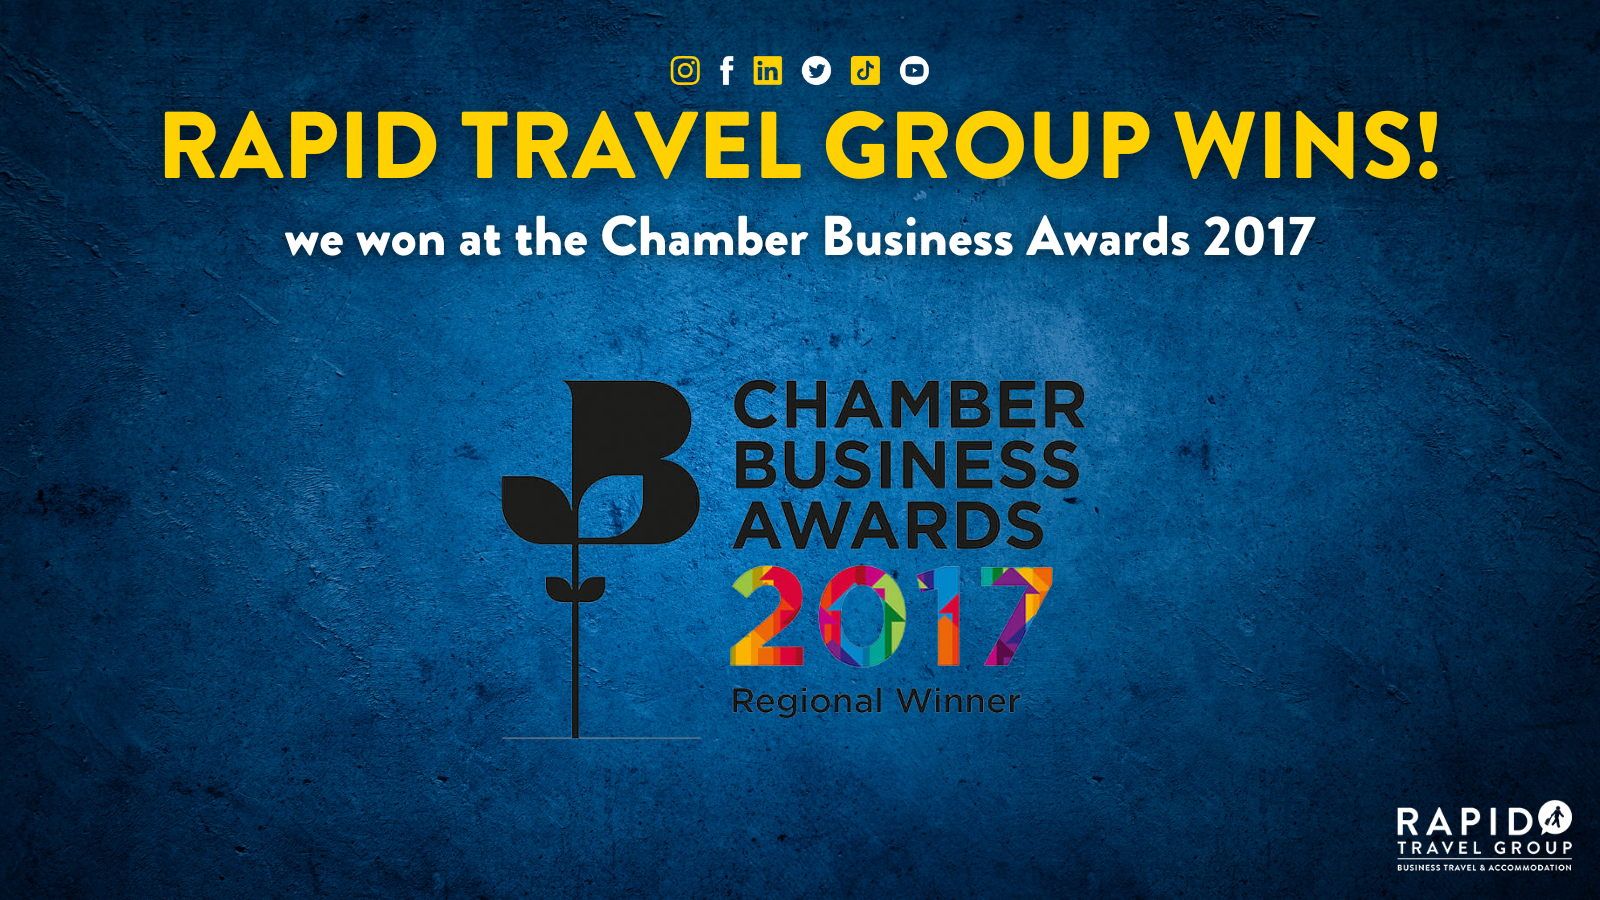 Rapid Travel Group wins! we won at the chamber business awards 2017